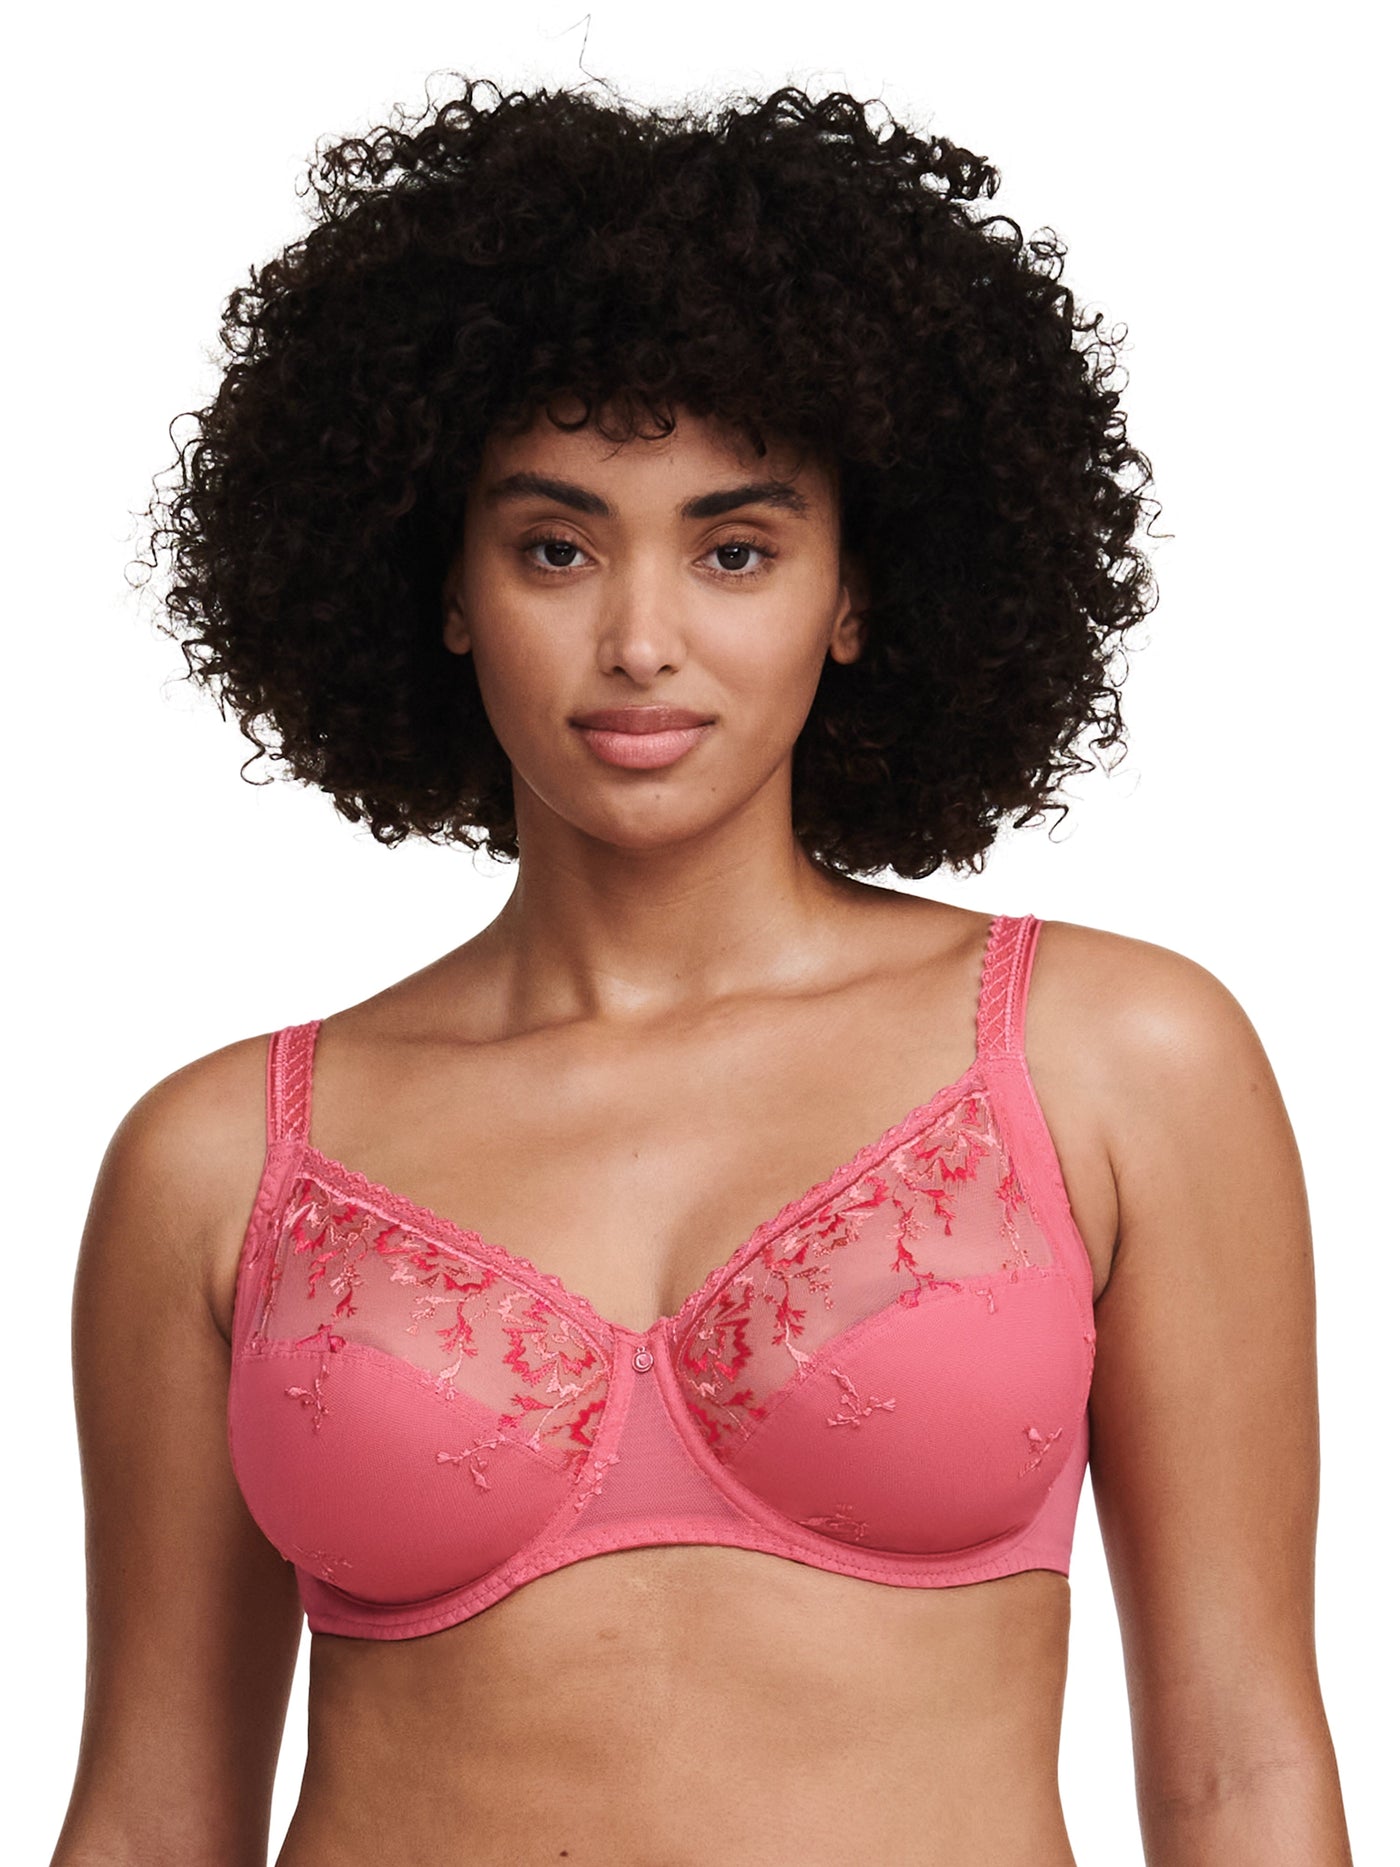 Chantelle Every Curve Very Covering Underwired Bra - Corallin Shades Full Cup Bra Chantelle 